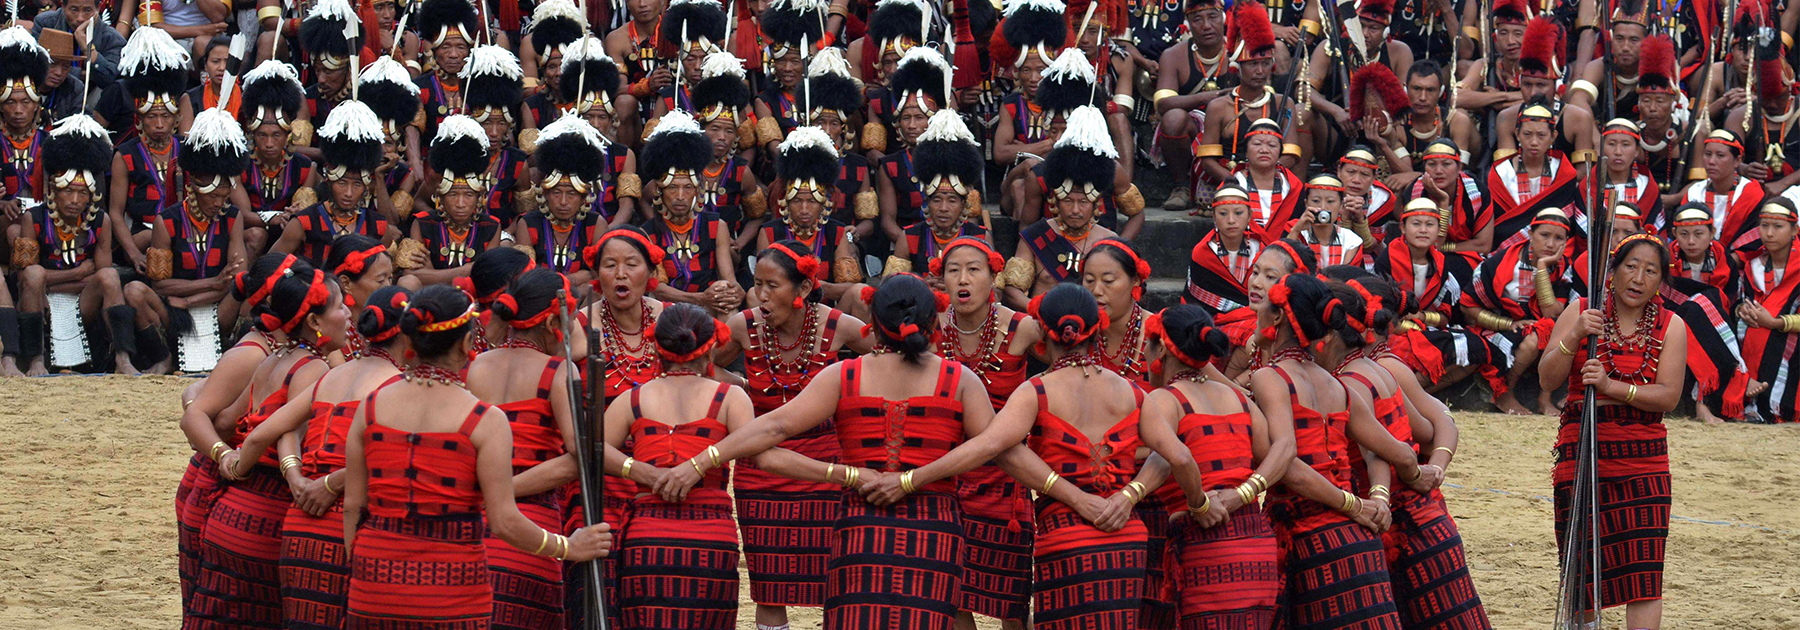 Members of the Naga tribe look on during the annual Hornbill Festival at Kisama village. (CHANDAN KHANNA/AFP/Getty Images)